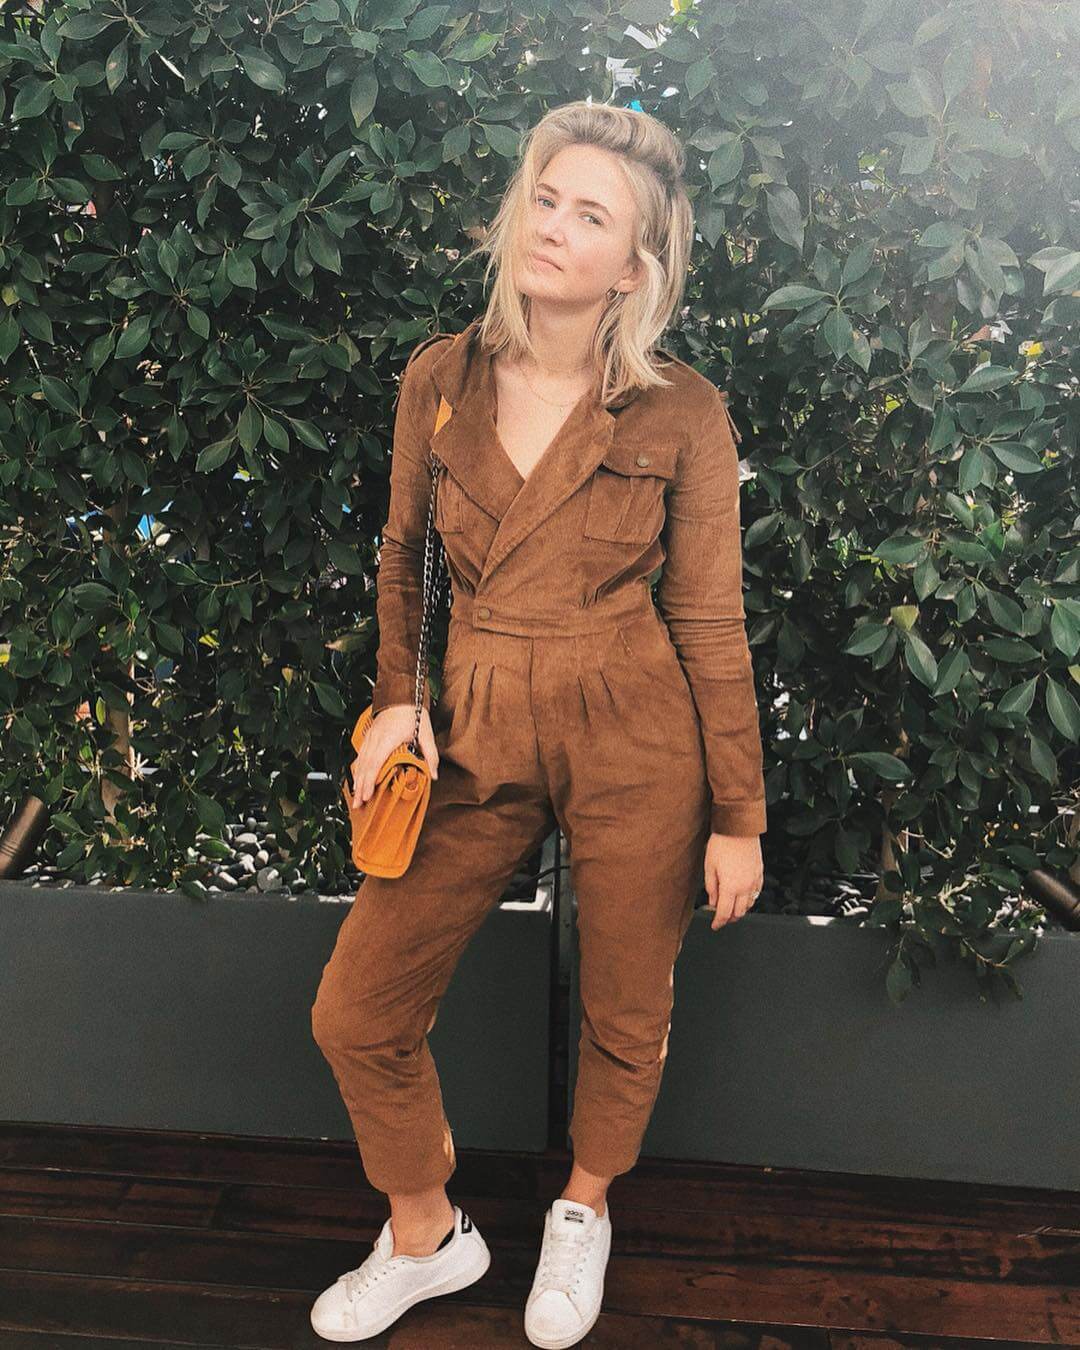 A Brown Jumpsuit for Brunch: Steal the Show Just Like Eliza!